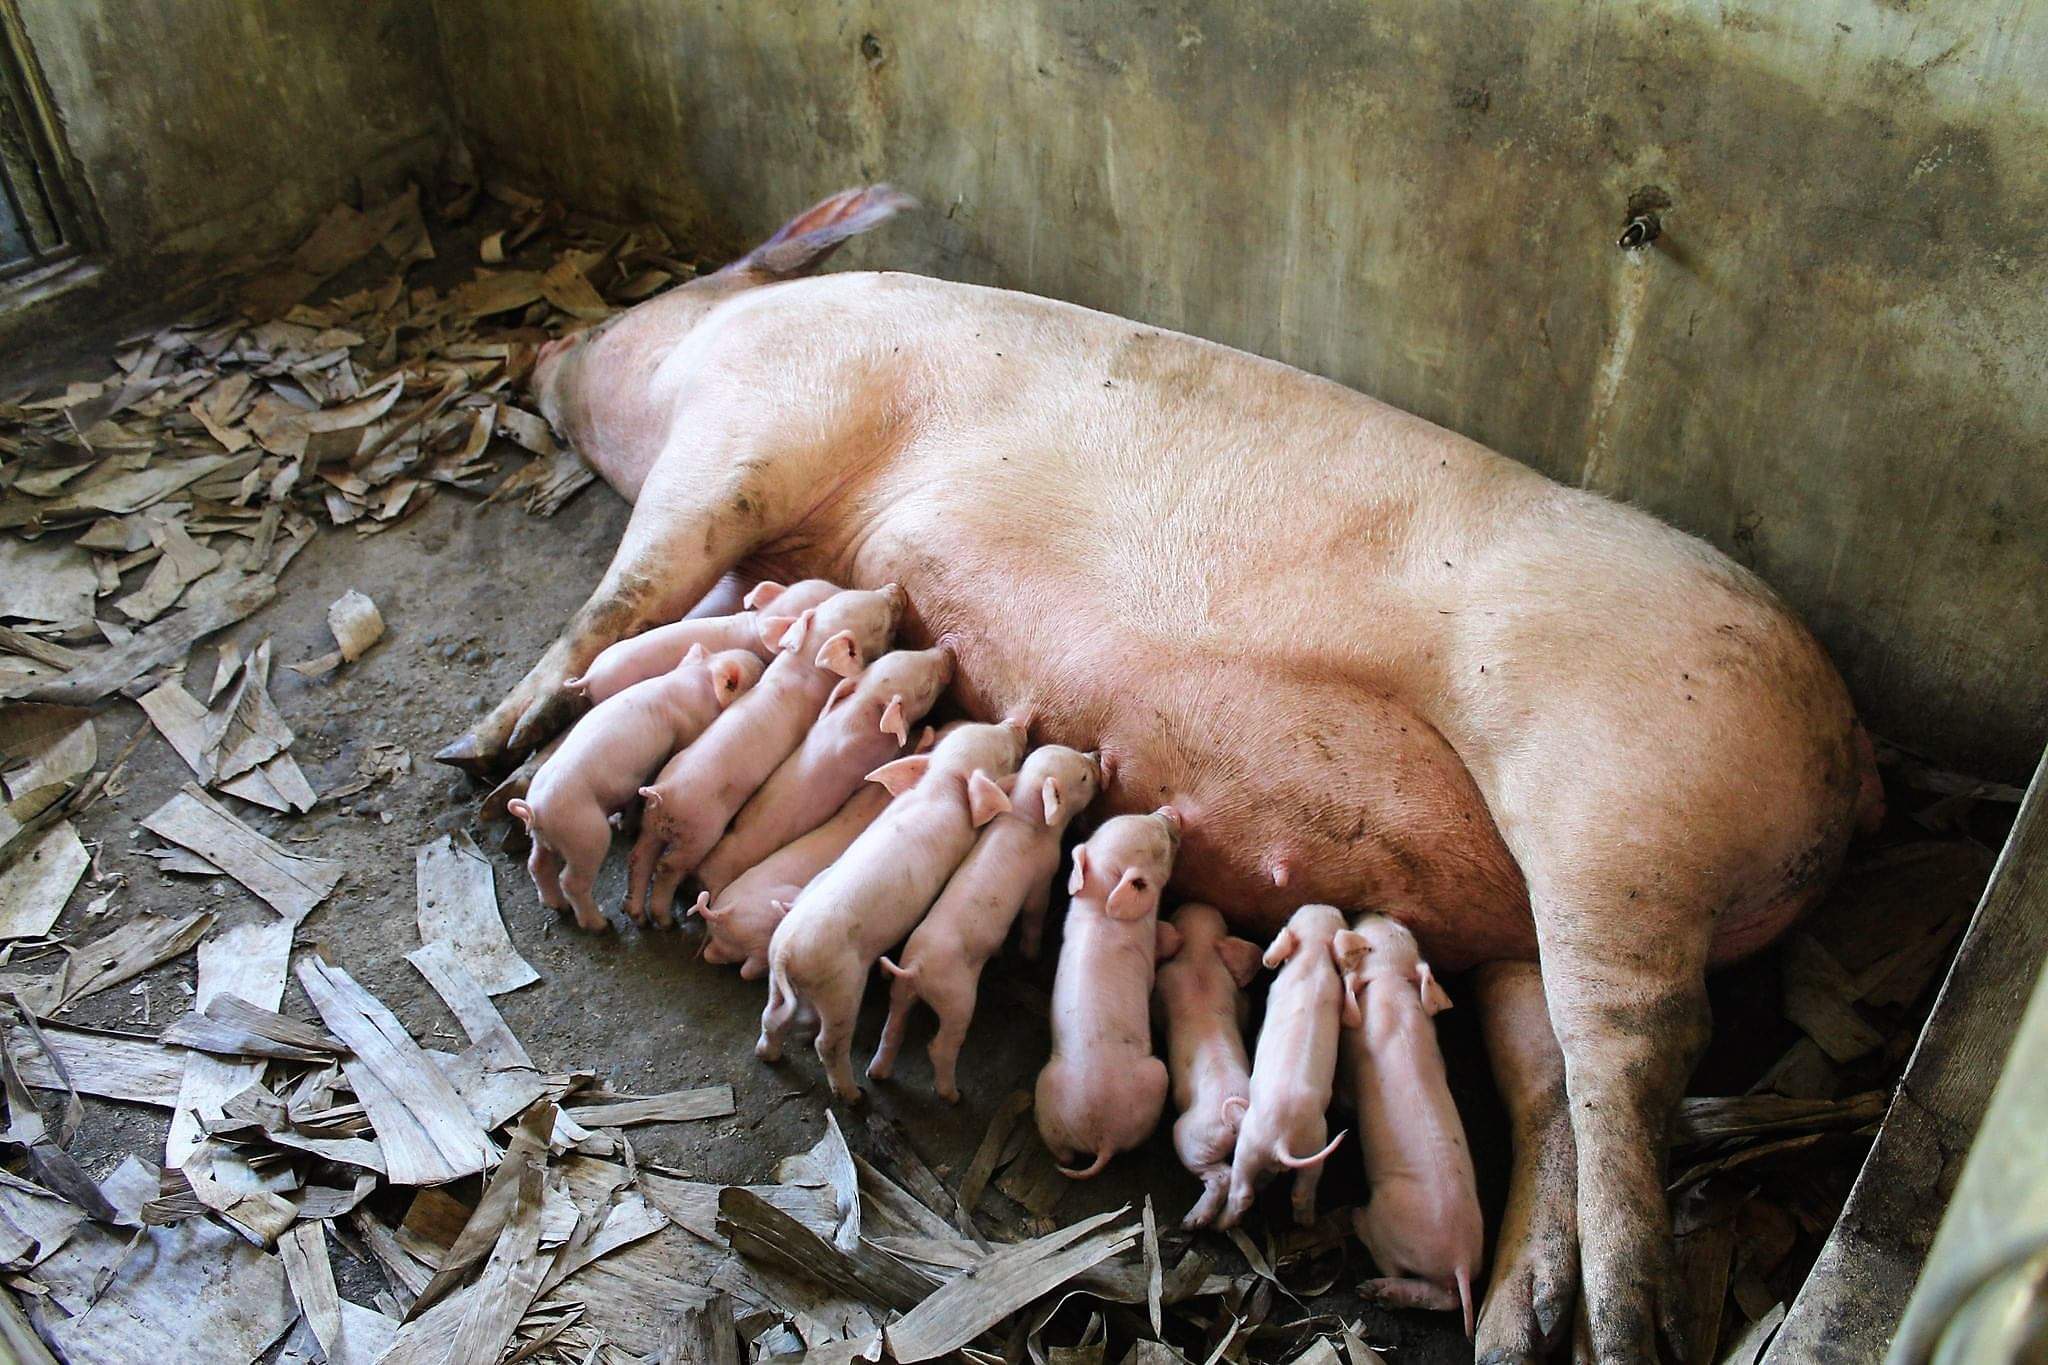 Jerome Madulin earns Php 32k from Swine Production Project